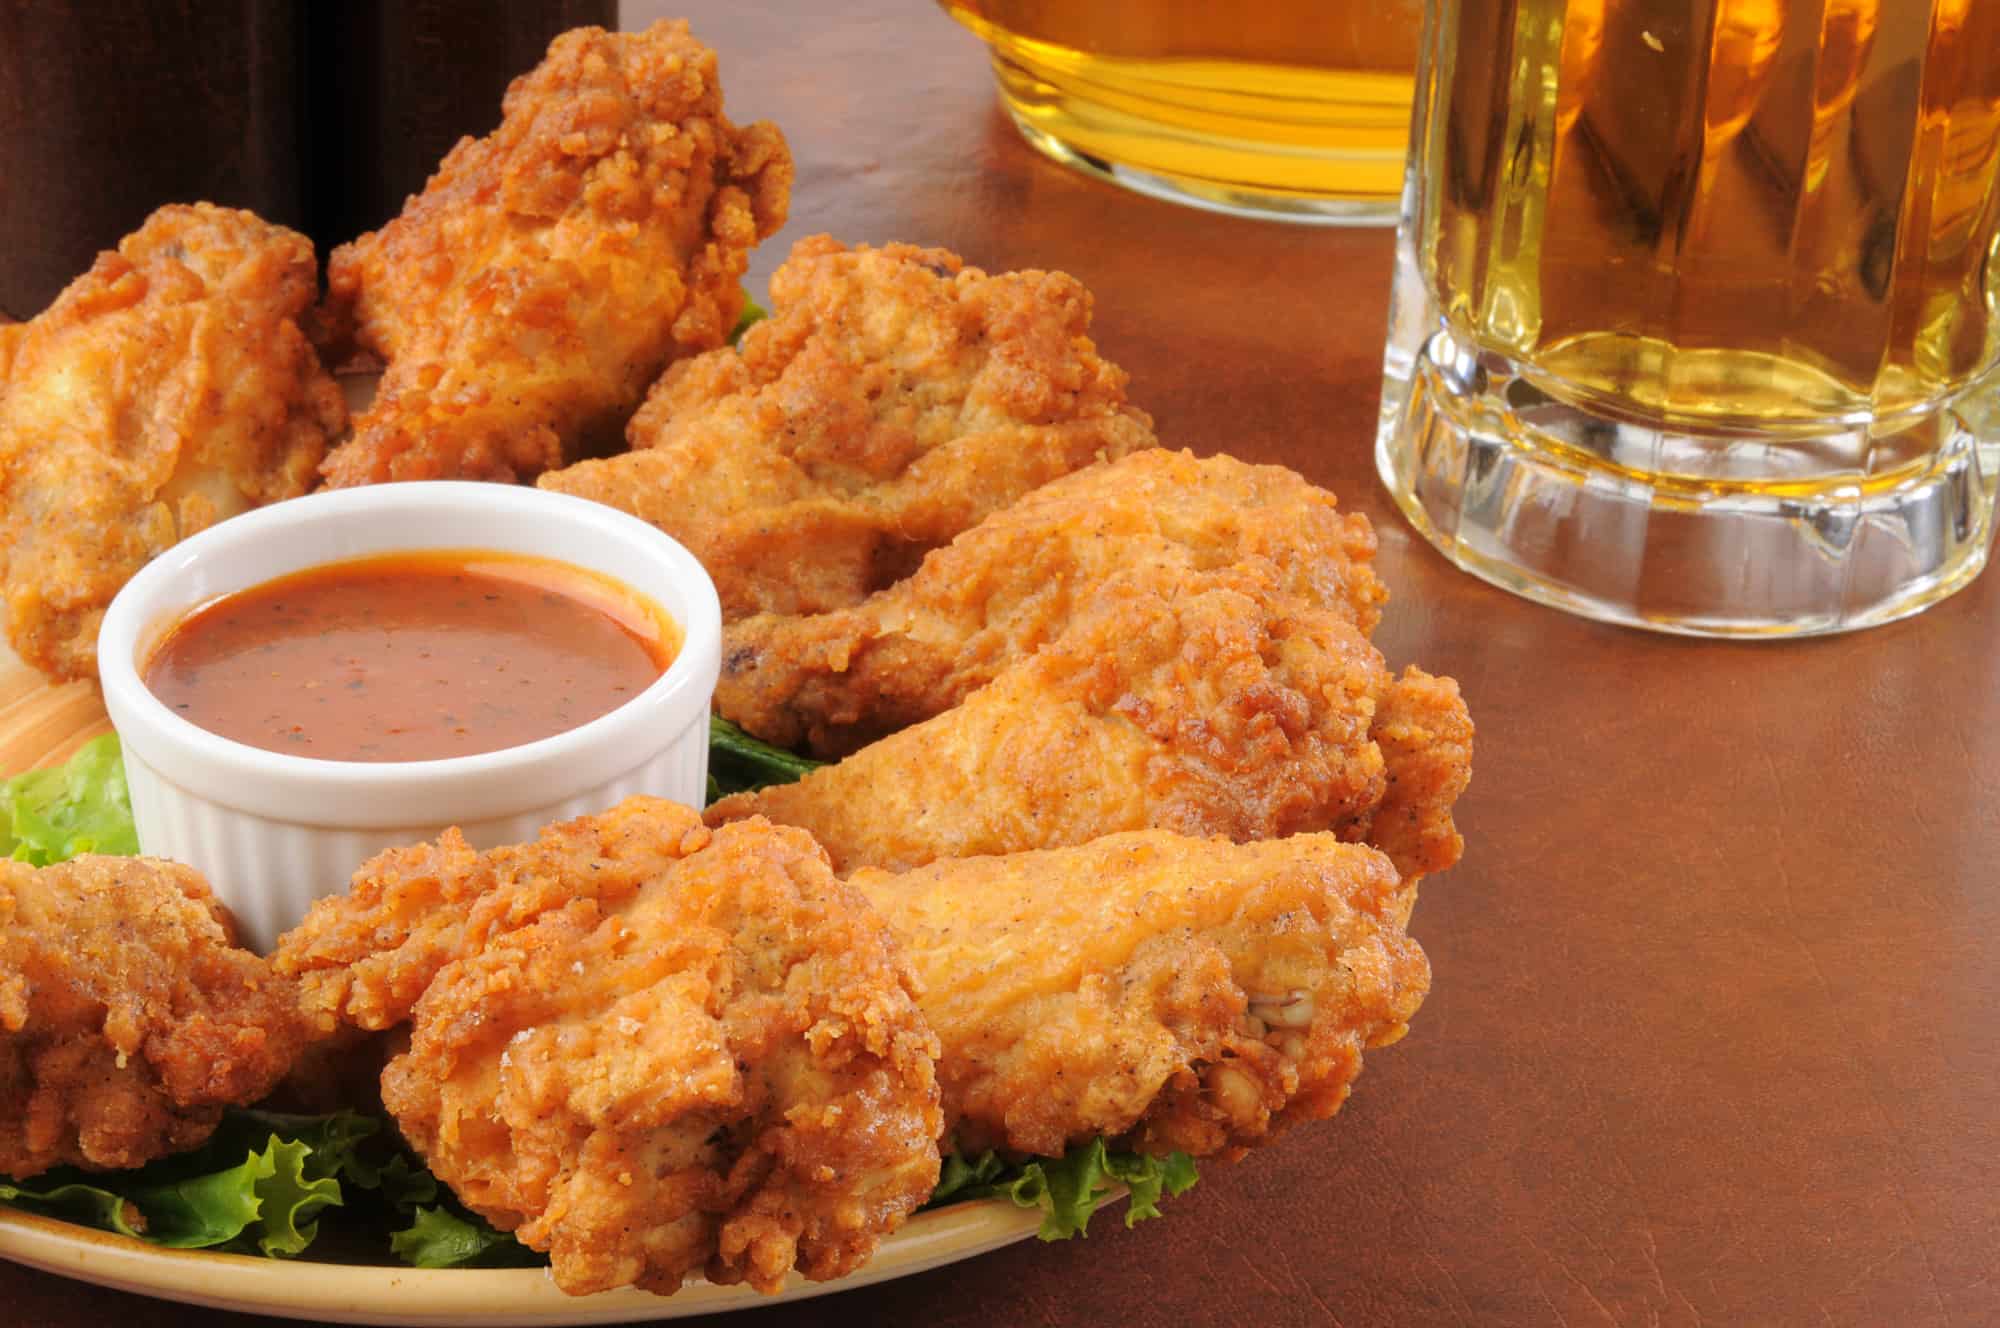 Chicken wings on a plate around a container of sauce with mug of beer in background